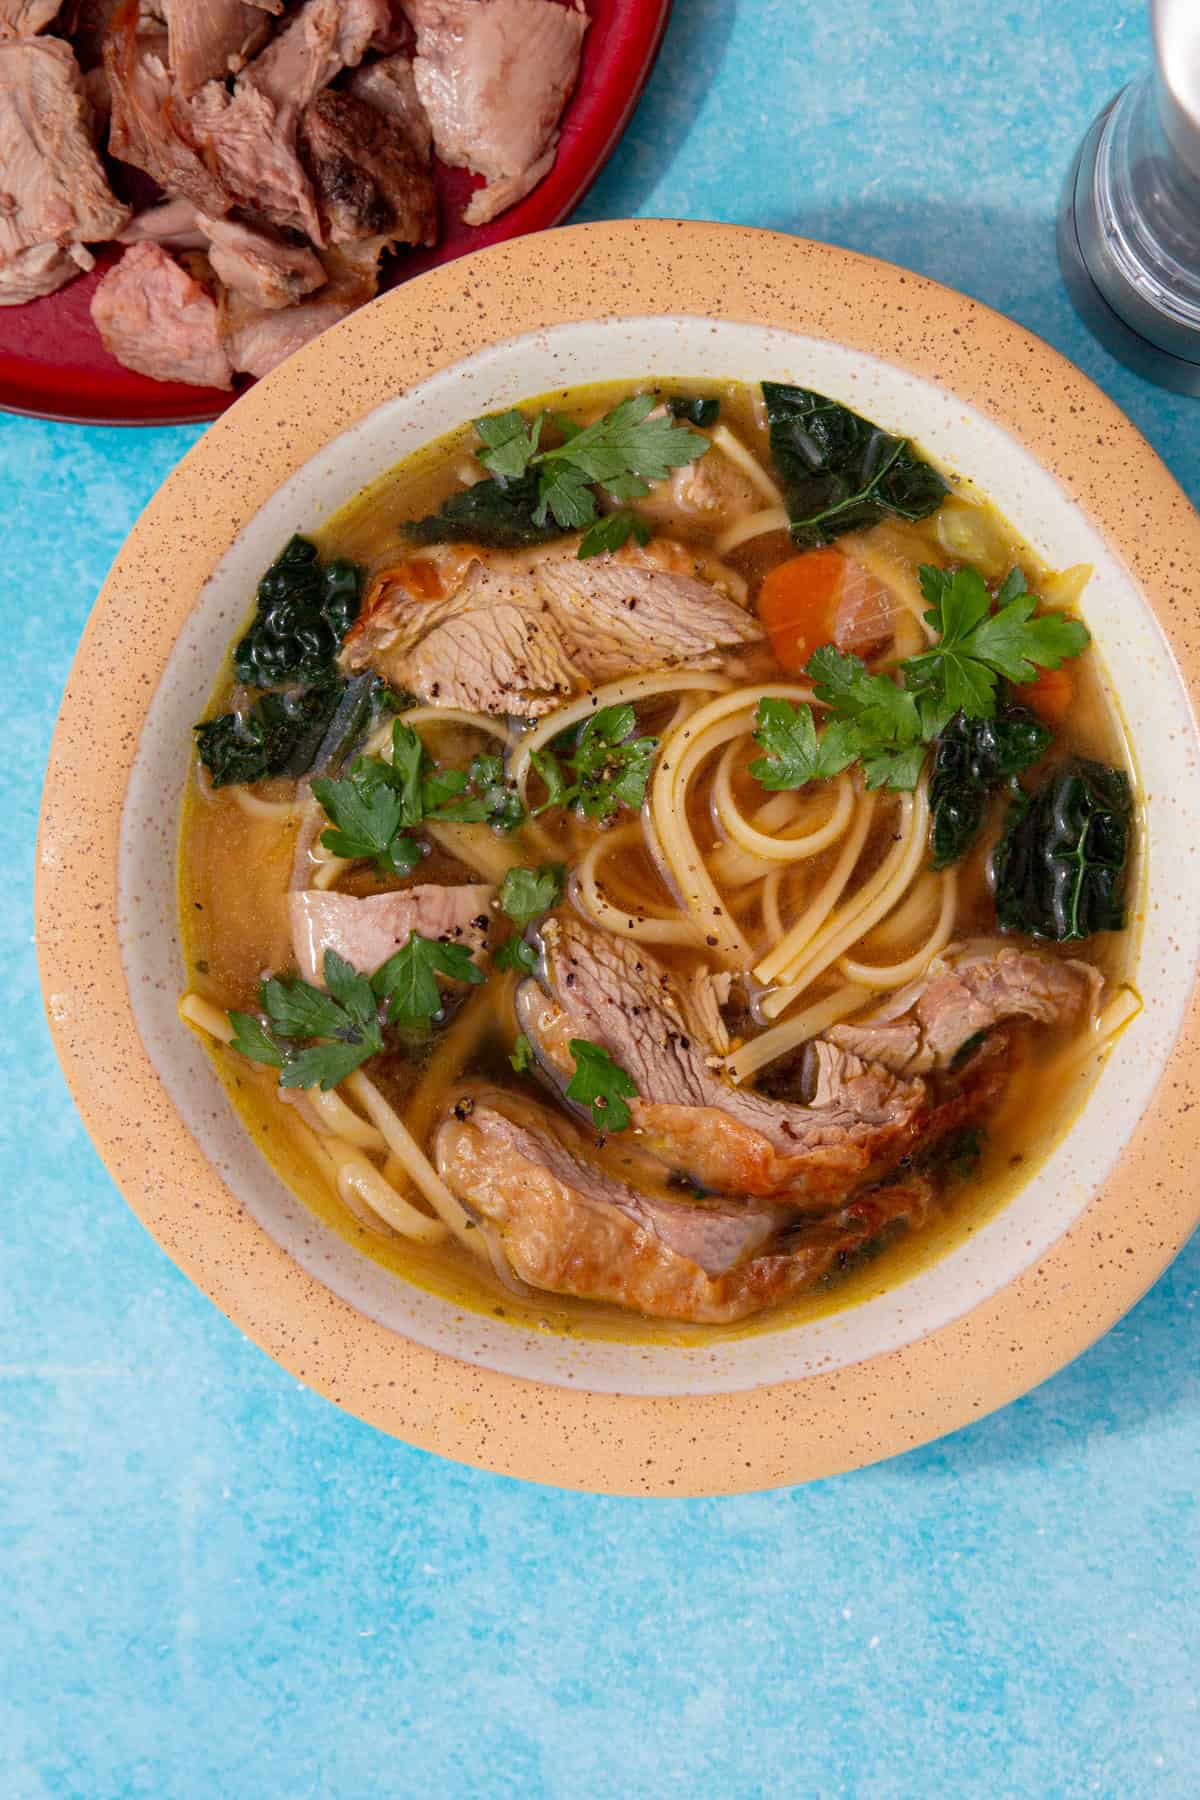 A bowl of soup with noodles, turkey, cavolo nero, carrot and some parsley with the turkey on a plate in partial view on a blue background.